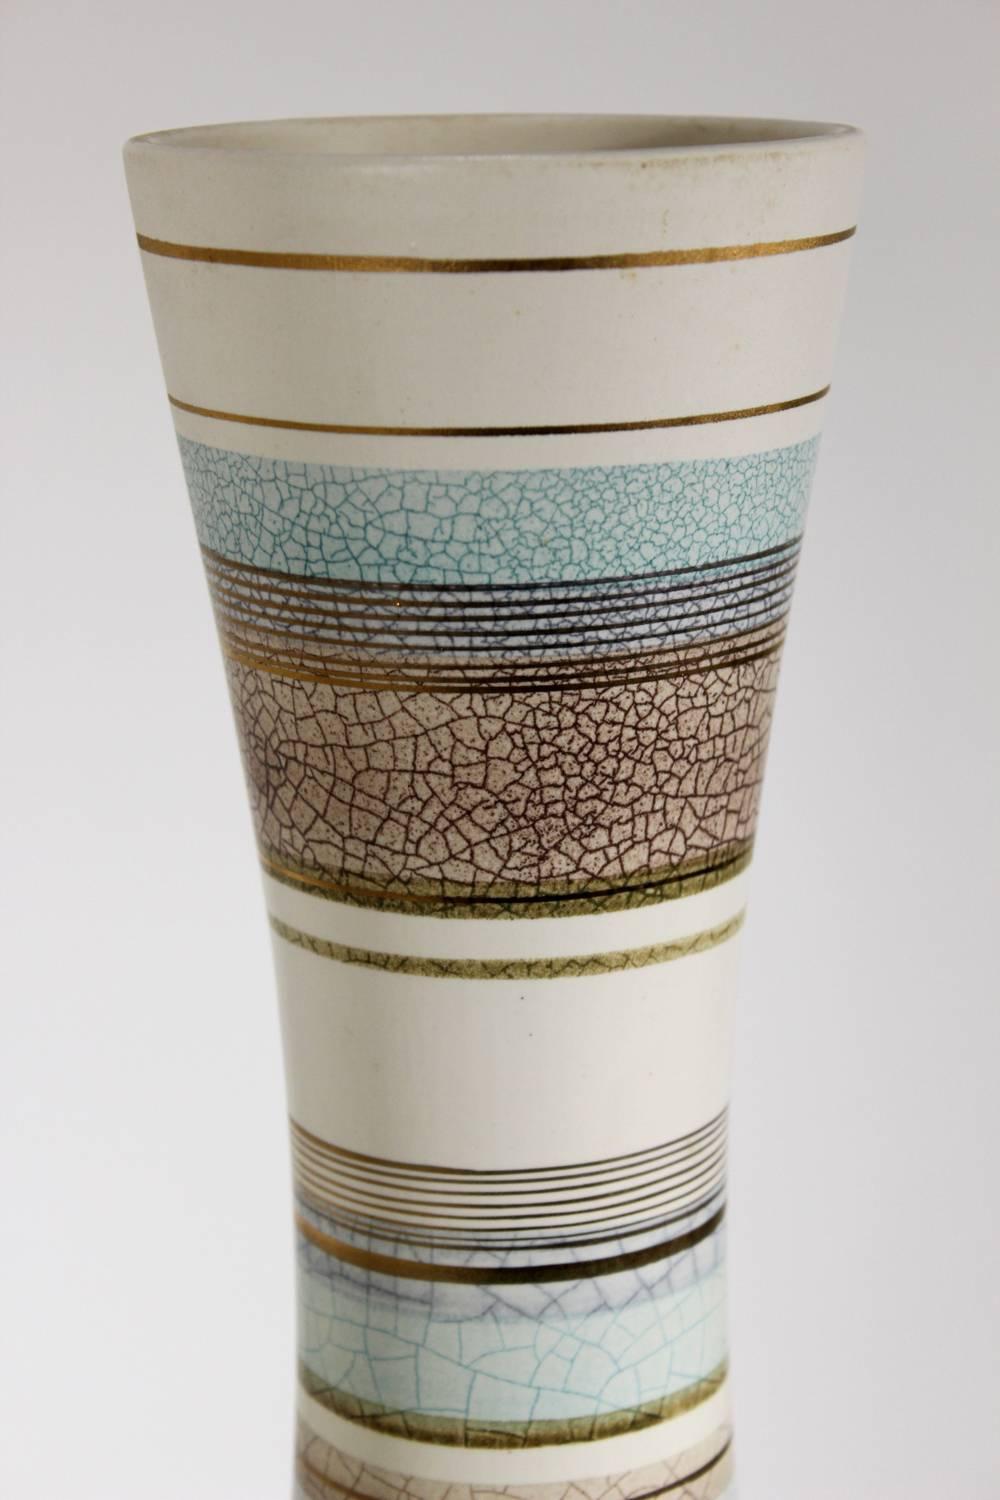 A tall, intricately decorated California Pottery vase by the celebrated designer Sascha Brastoff in his 